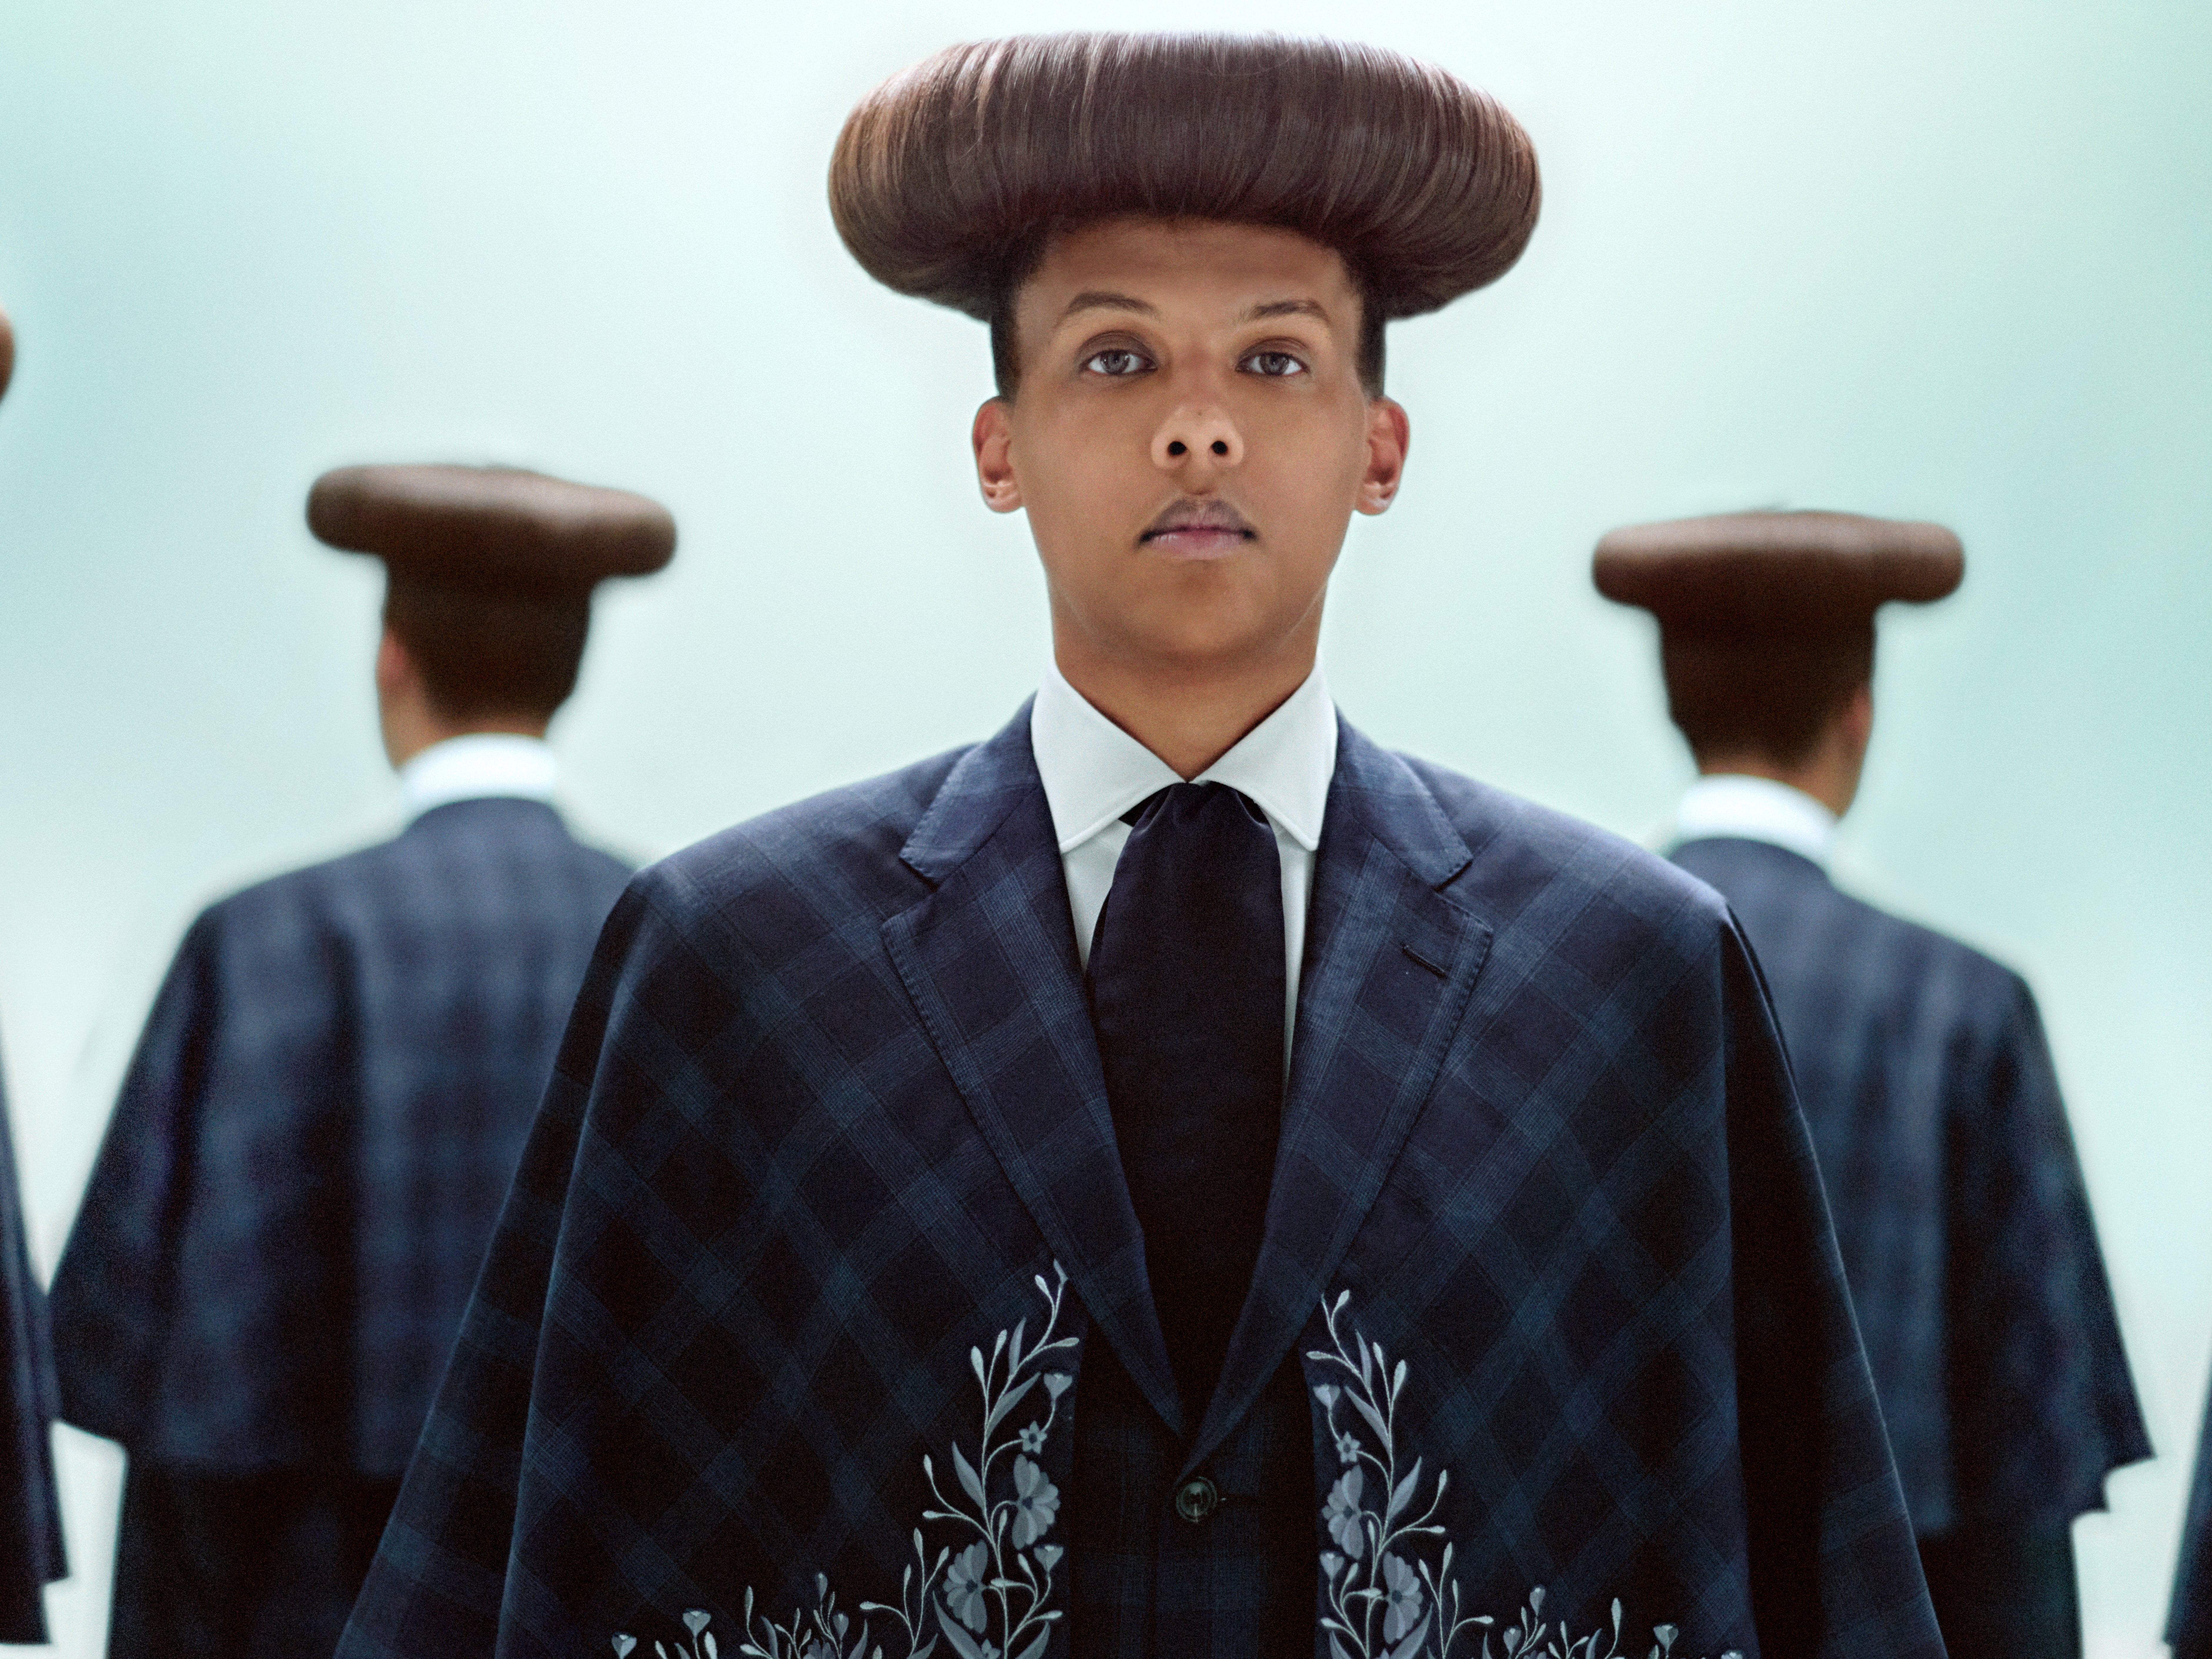 Stromae No one told me I was a one-hit wonder photo image